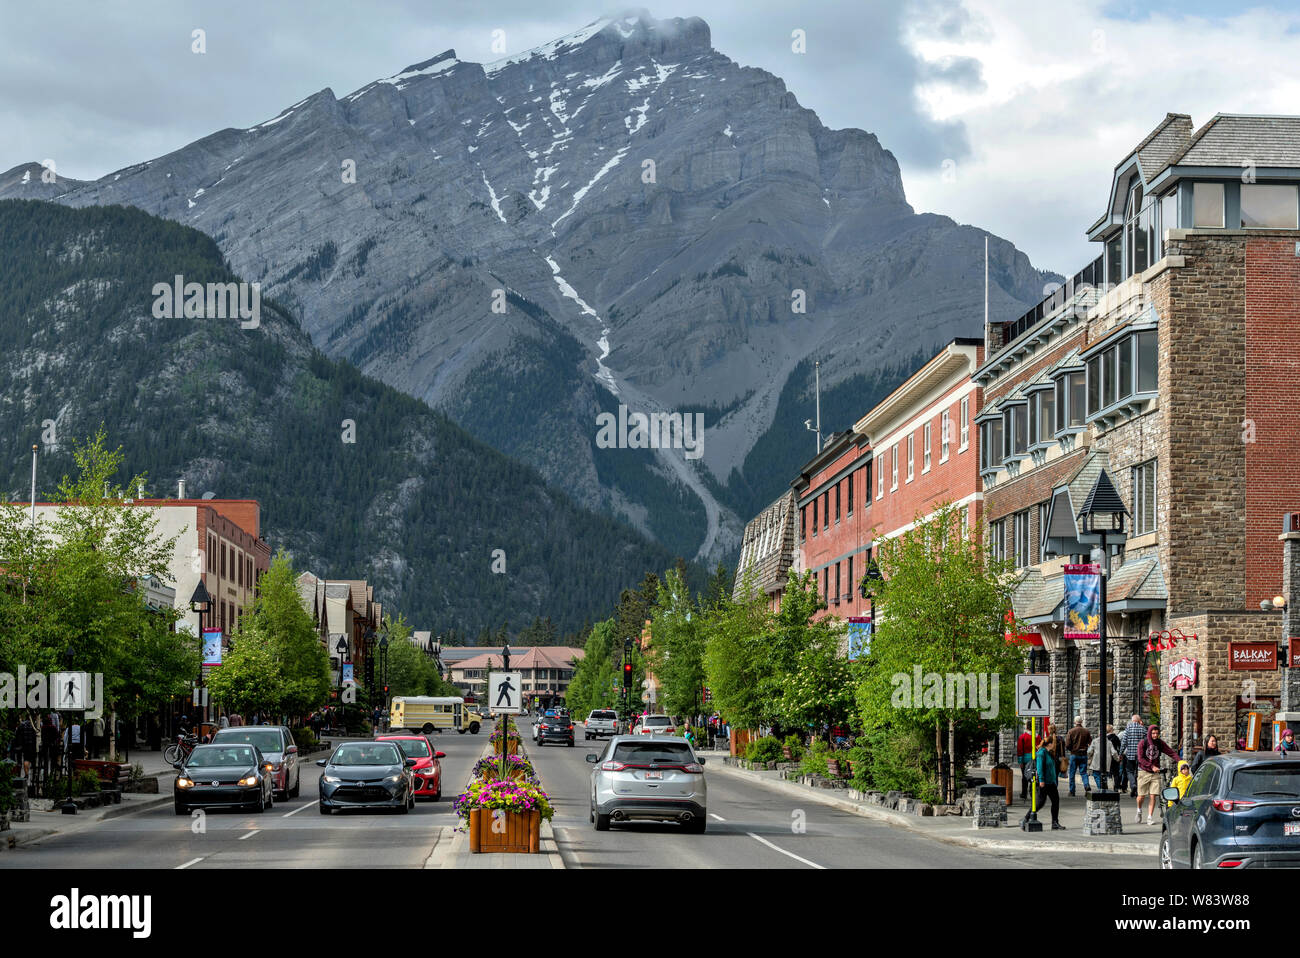 Cascade Mountain At Banff Ave - Formidable Cascade Mountain towering high at far end of busy Banff Avenue on a cloudy Spring day in Downtown Banff. Stock Photo